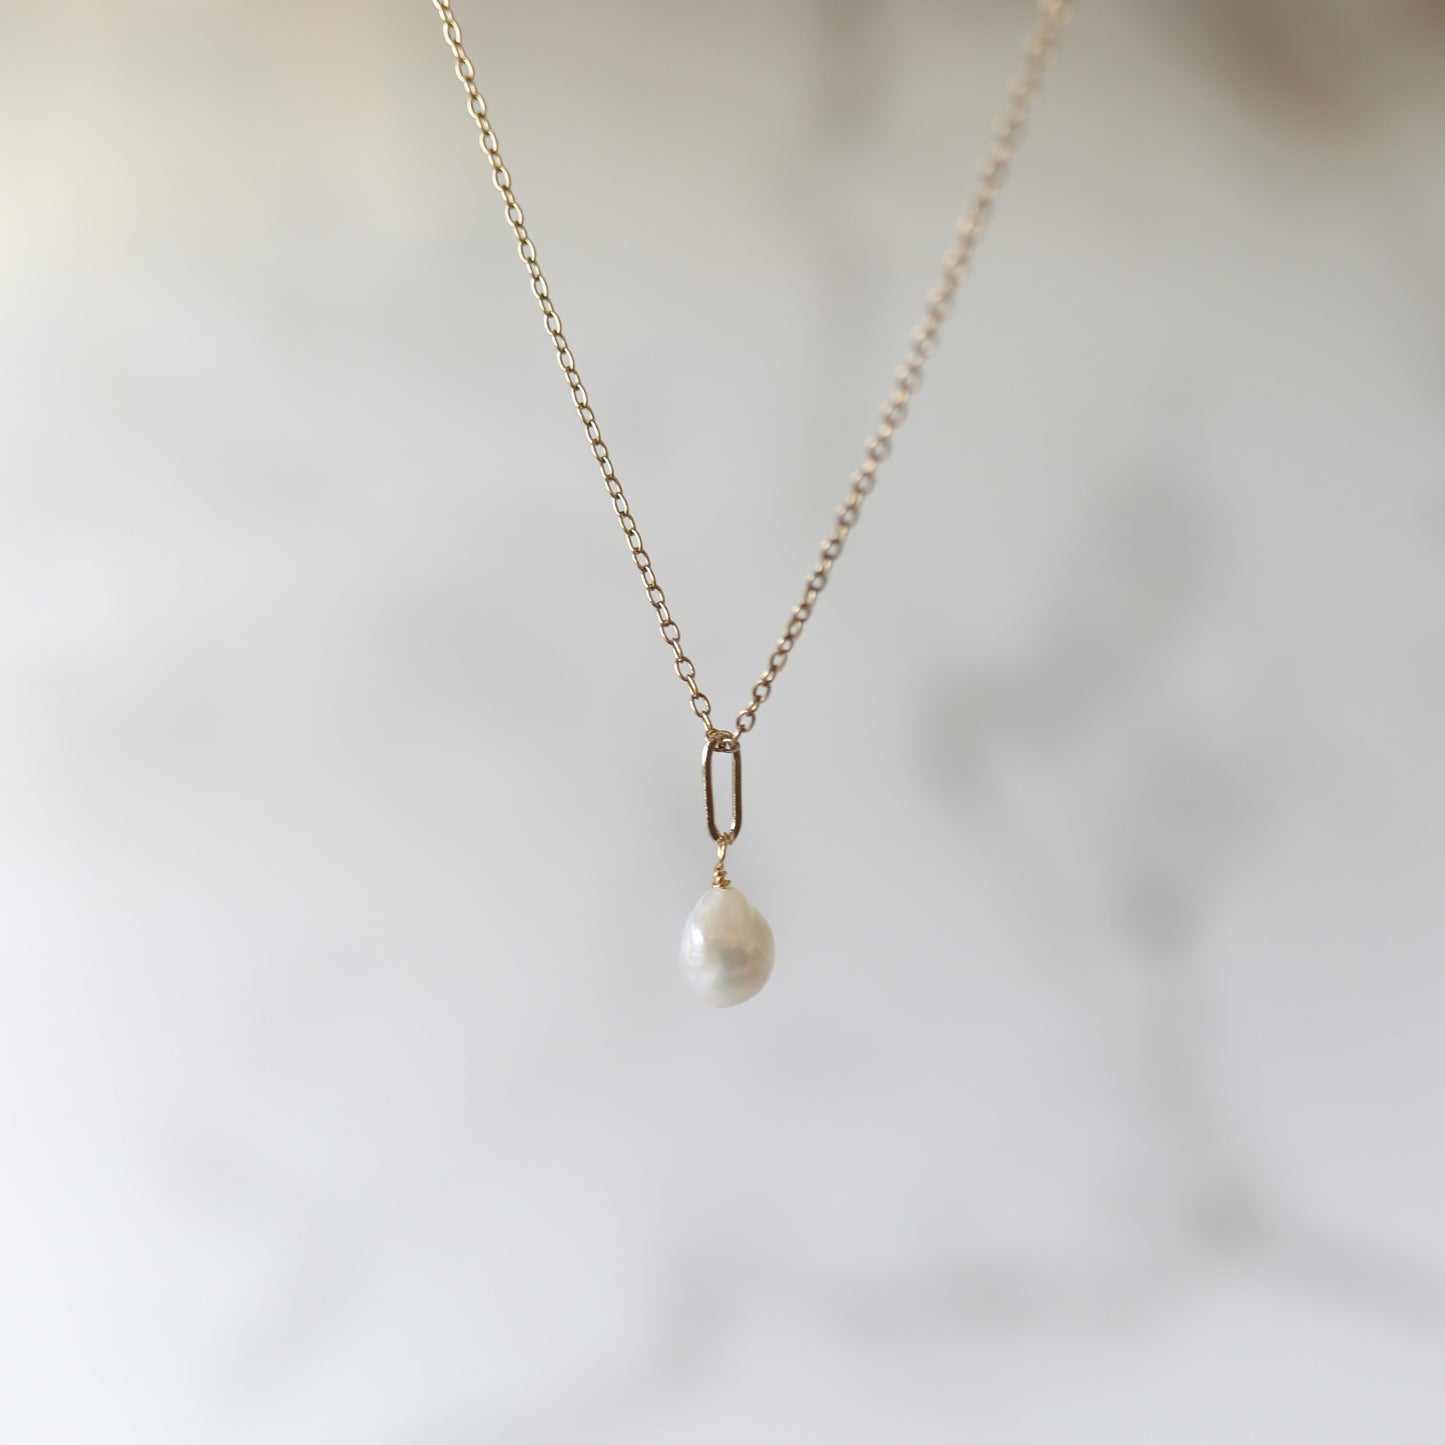 Good Luck Necklace with Freshwater Pearl